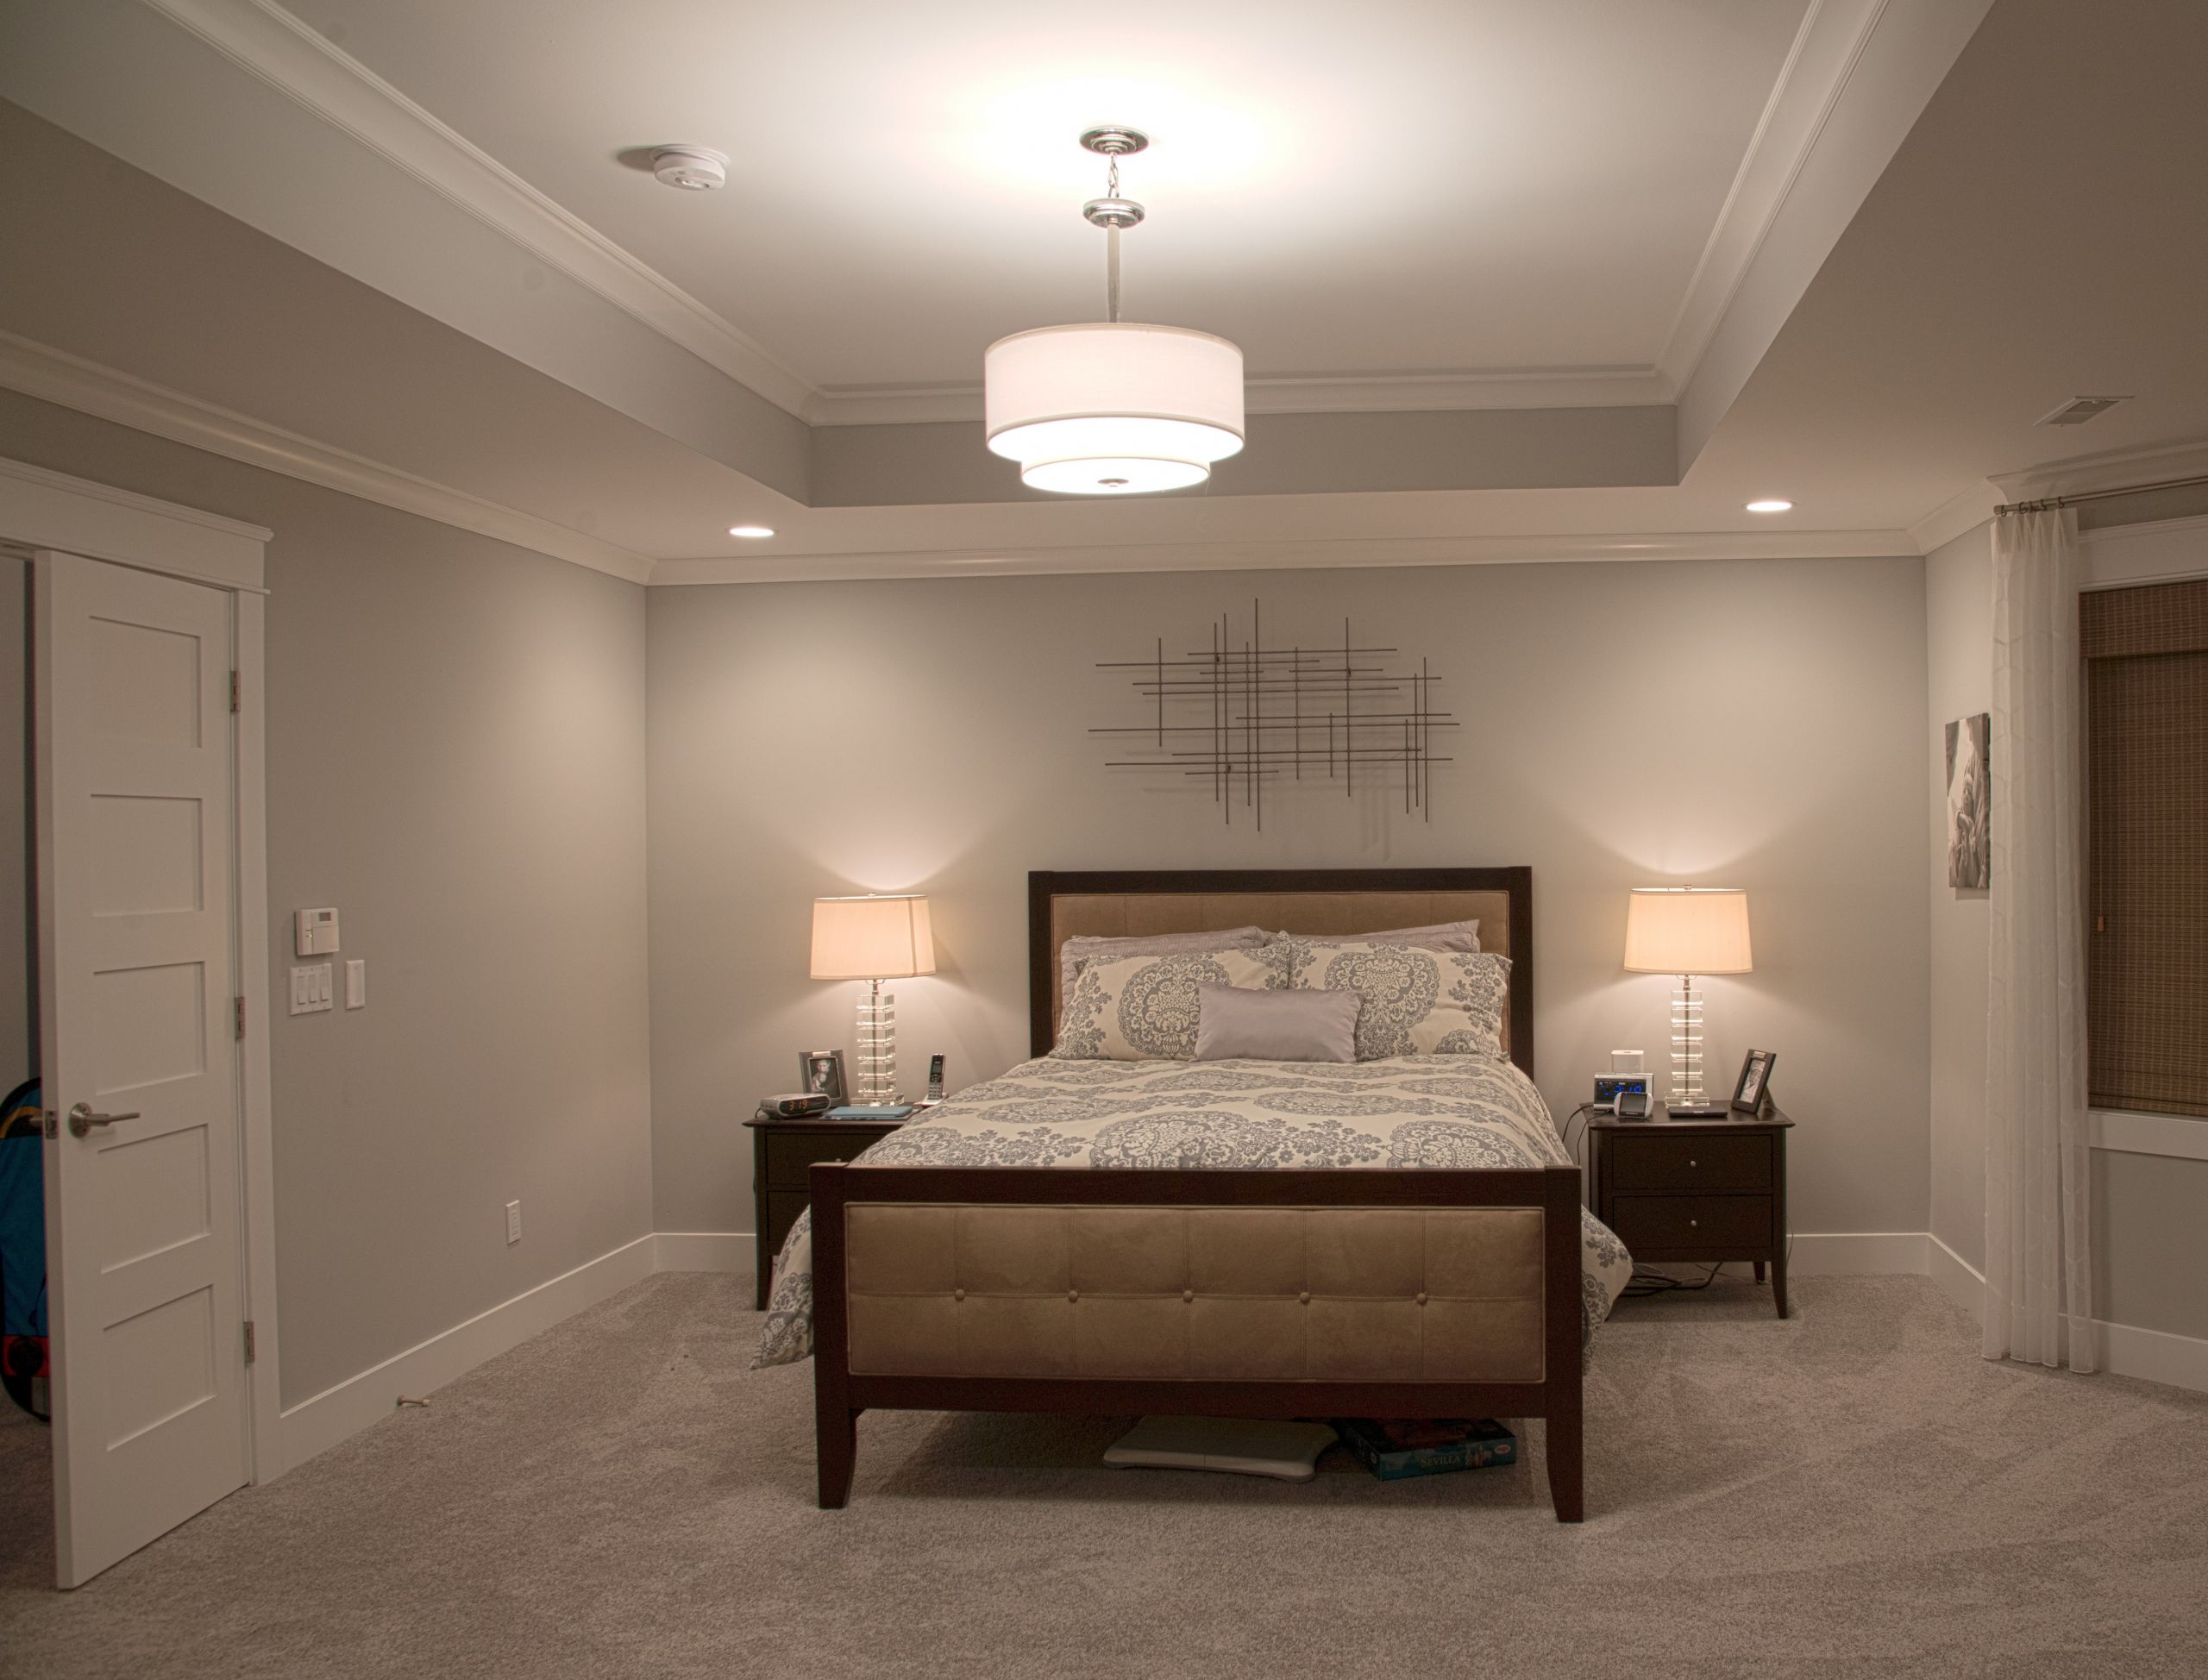 Bedroom Ceiling Lighting
 What s Your Design Style Gross Electric